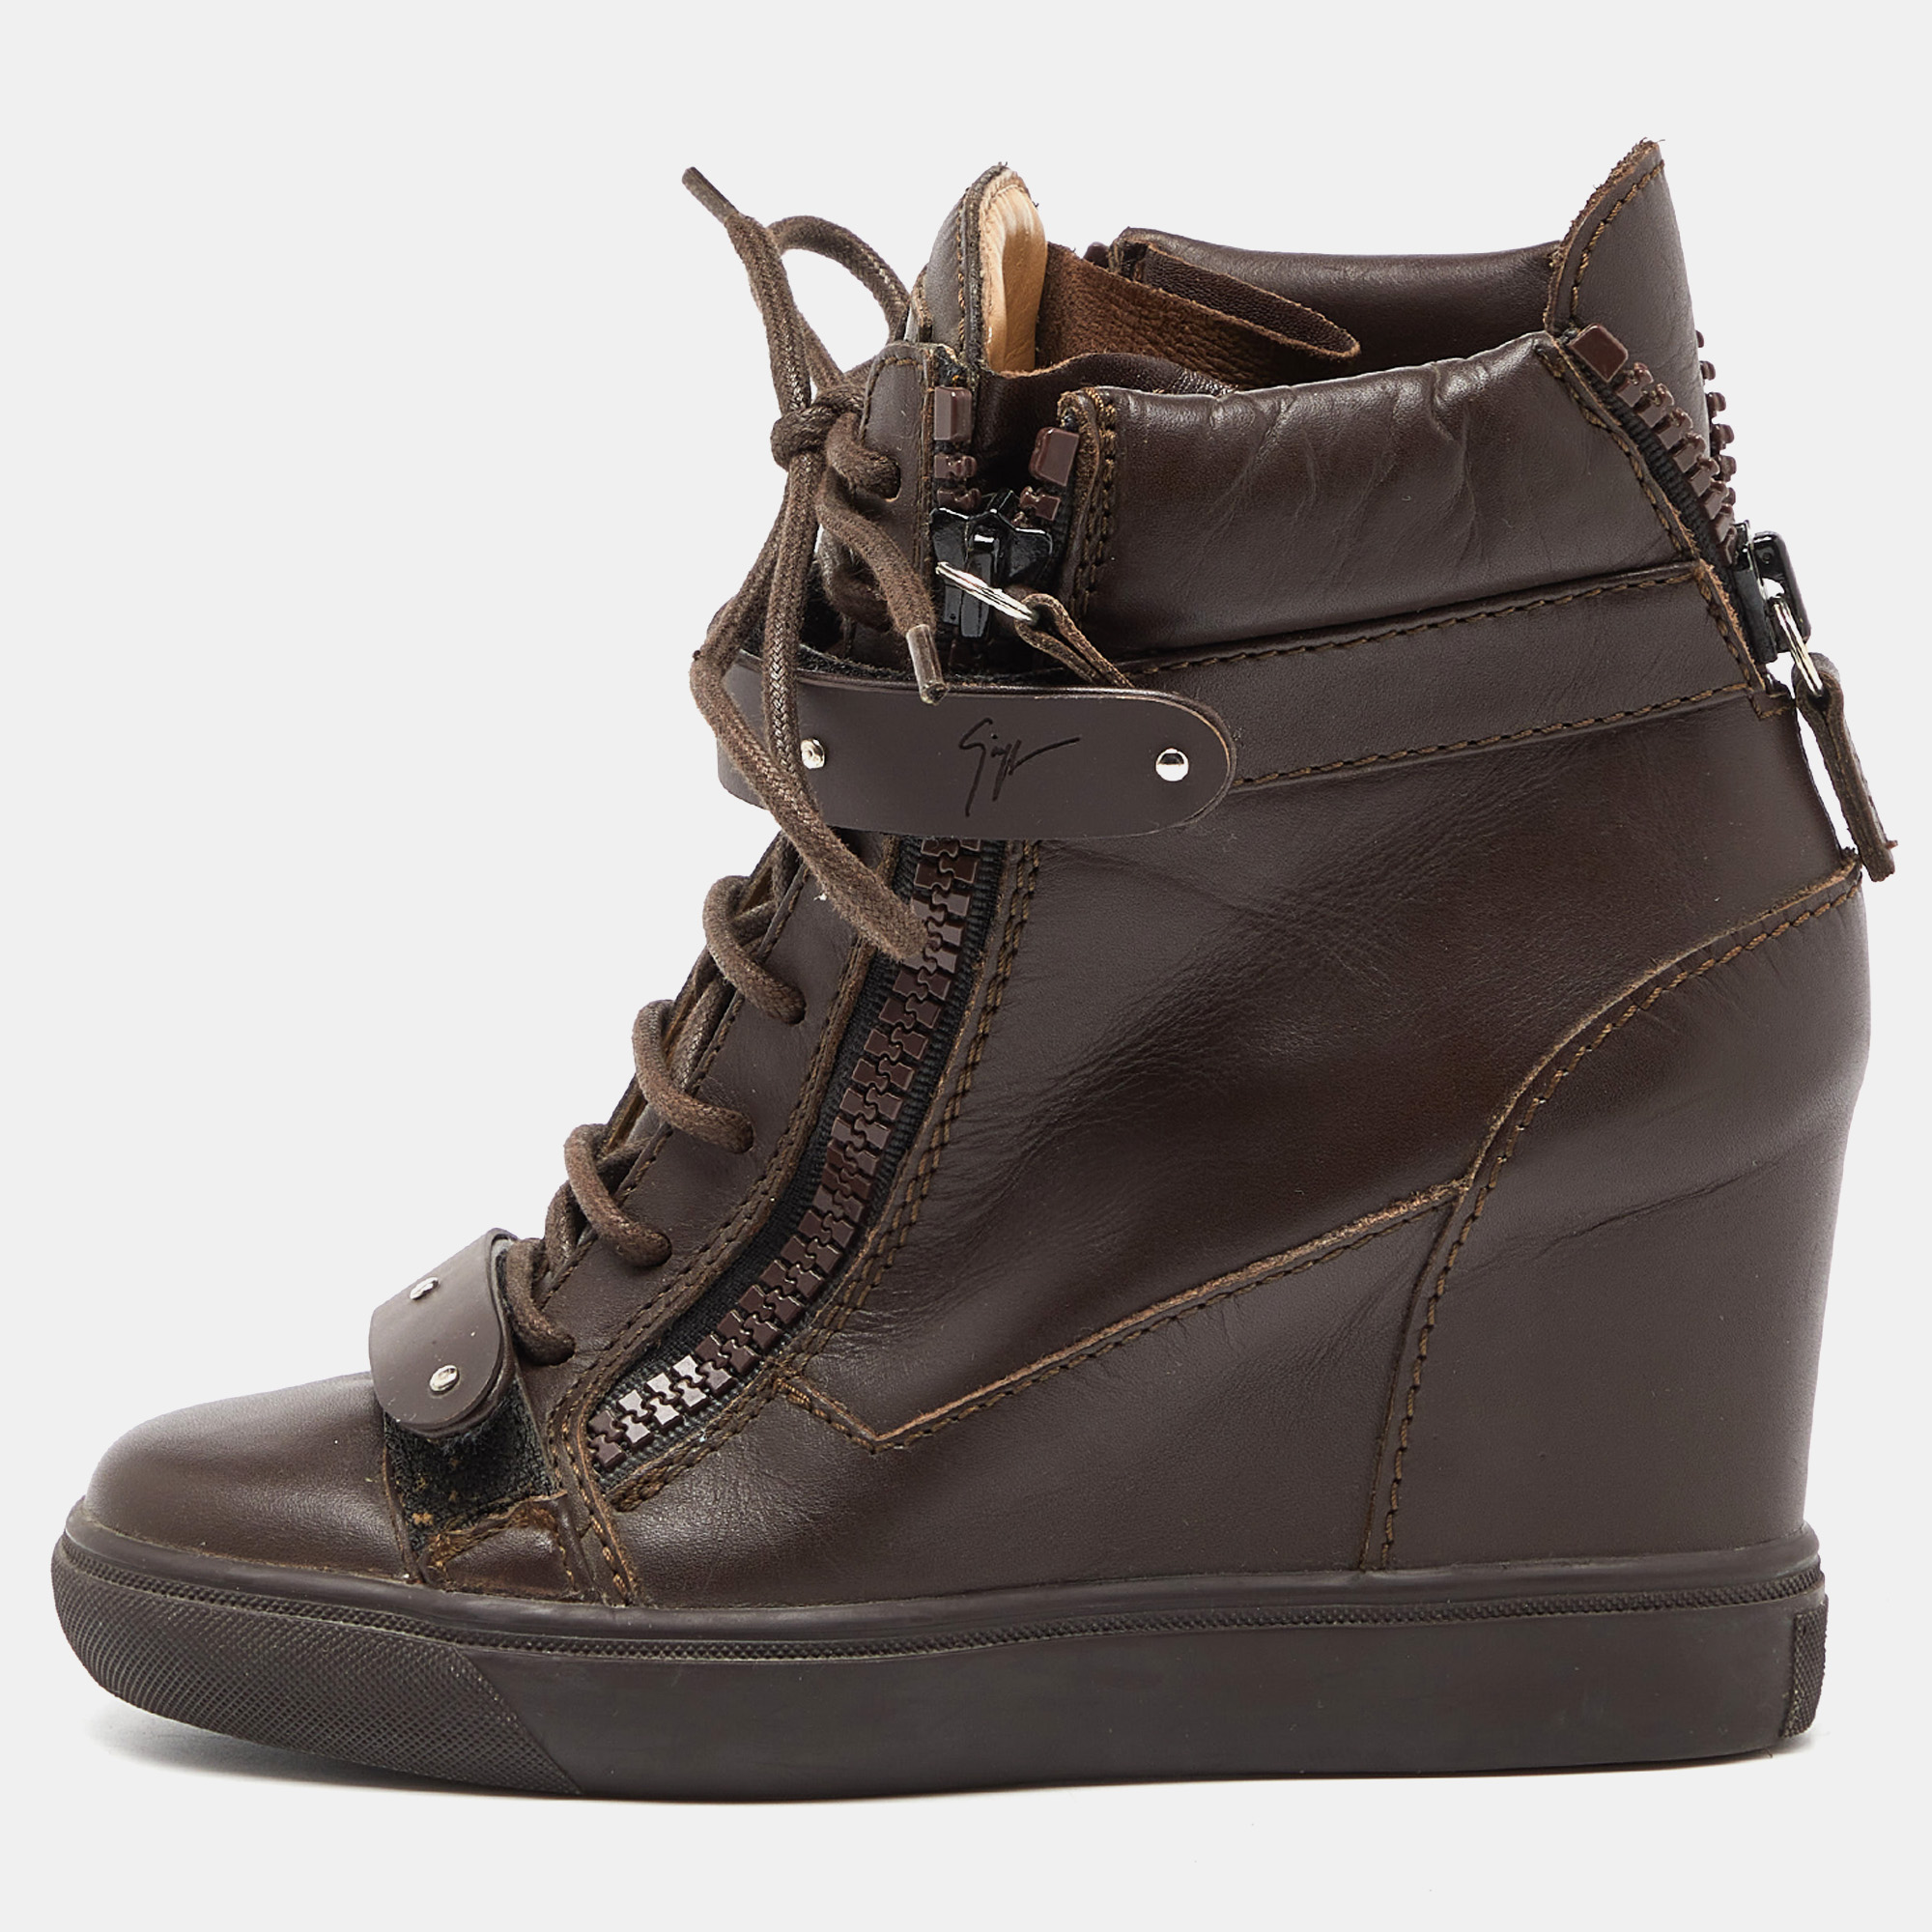 Giuseppe Zanotti Brown Leather Coby Wedge Sneakers Size 36